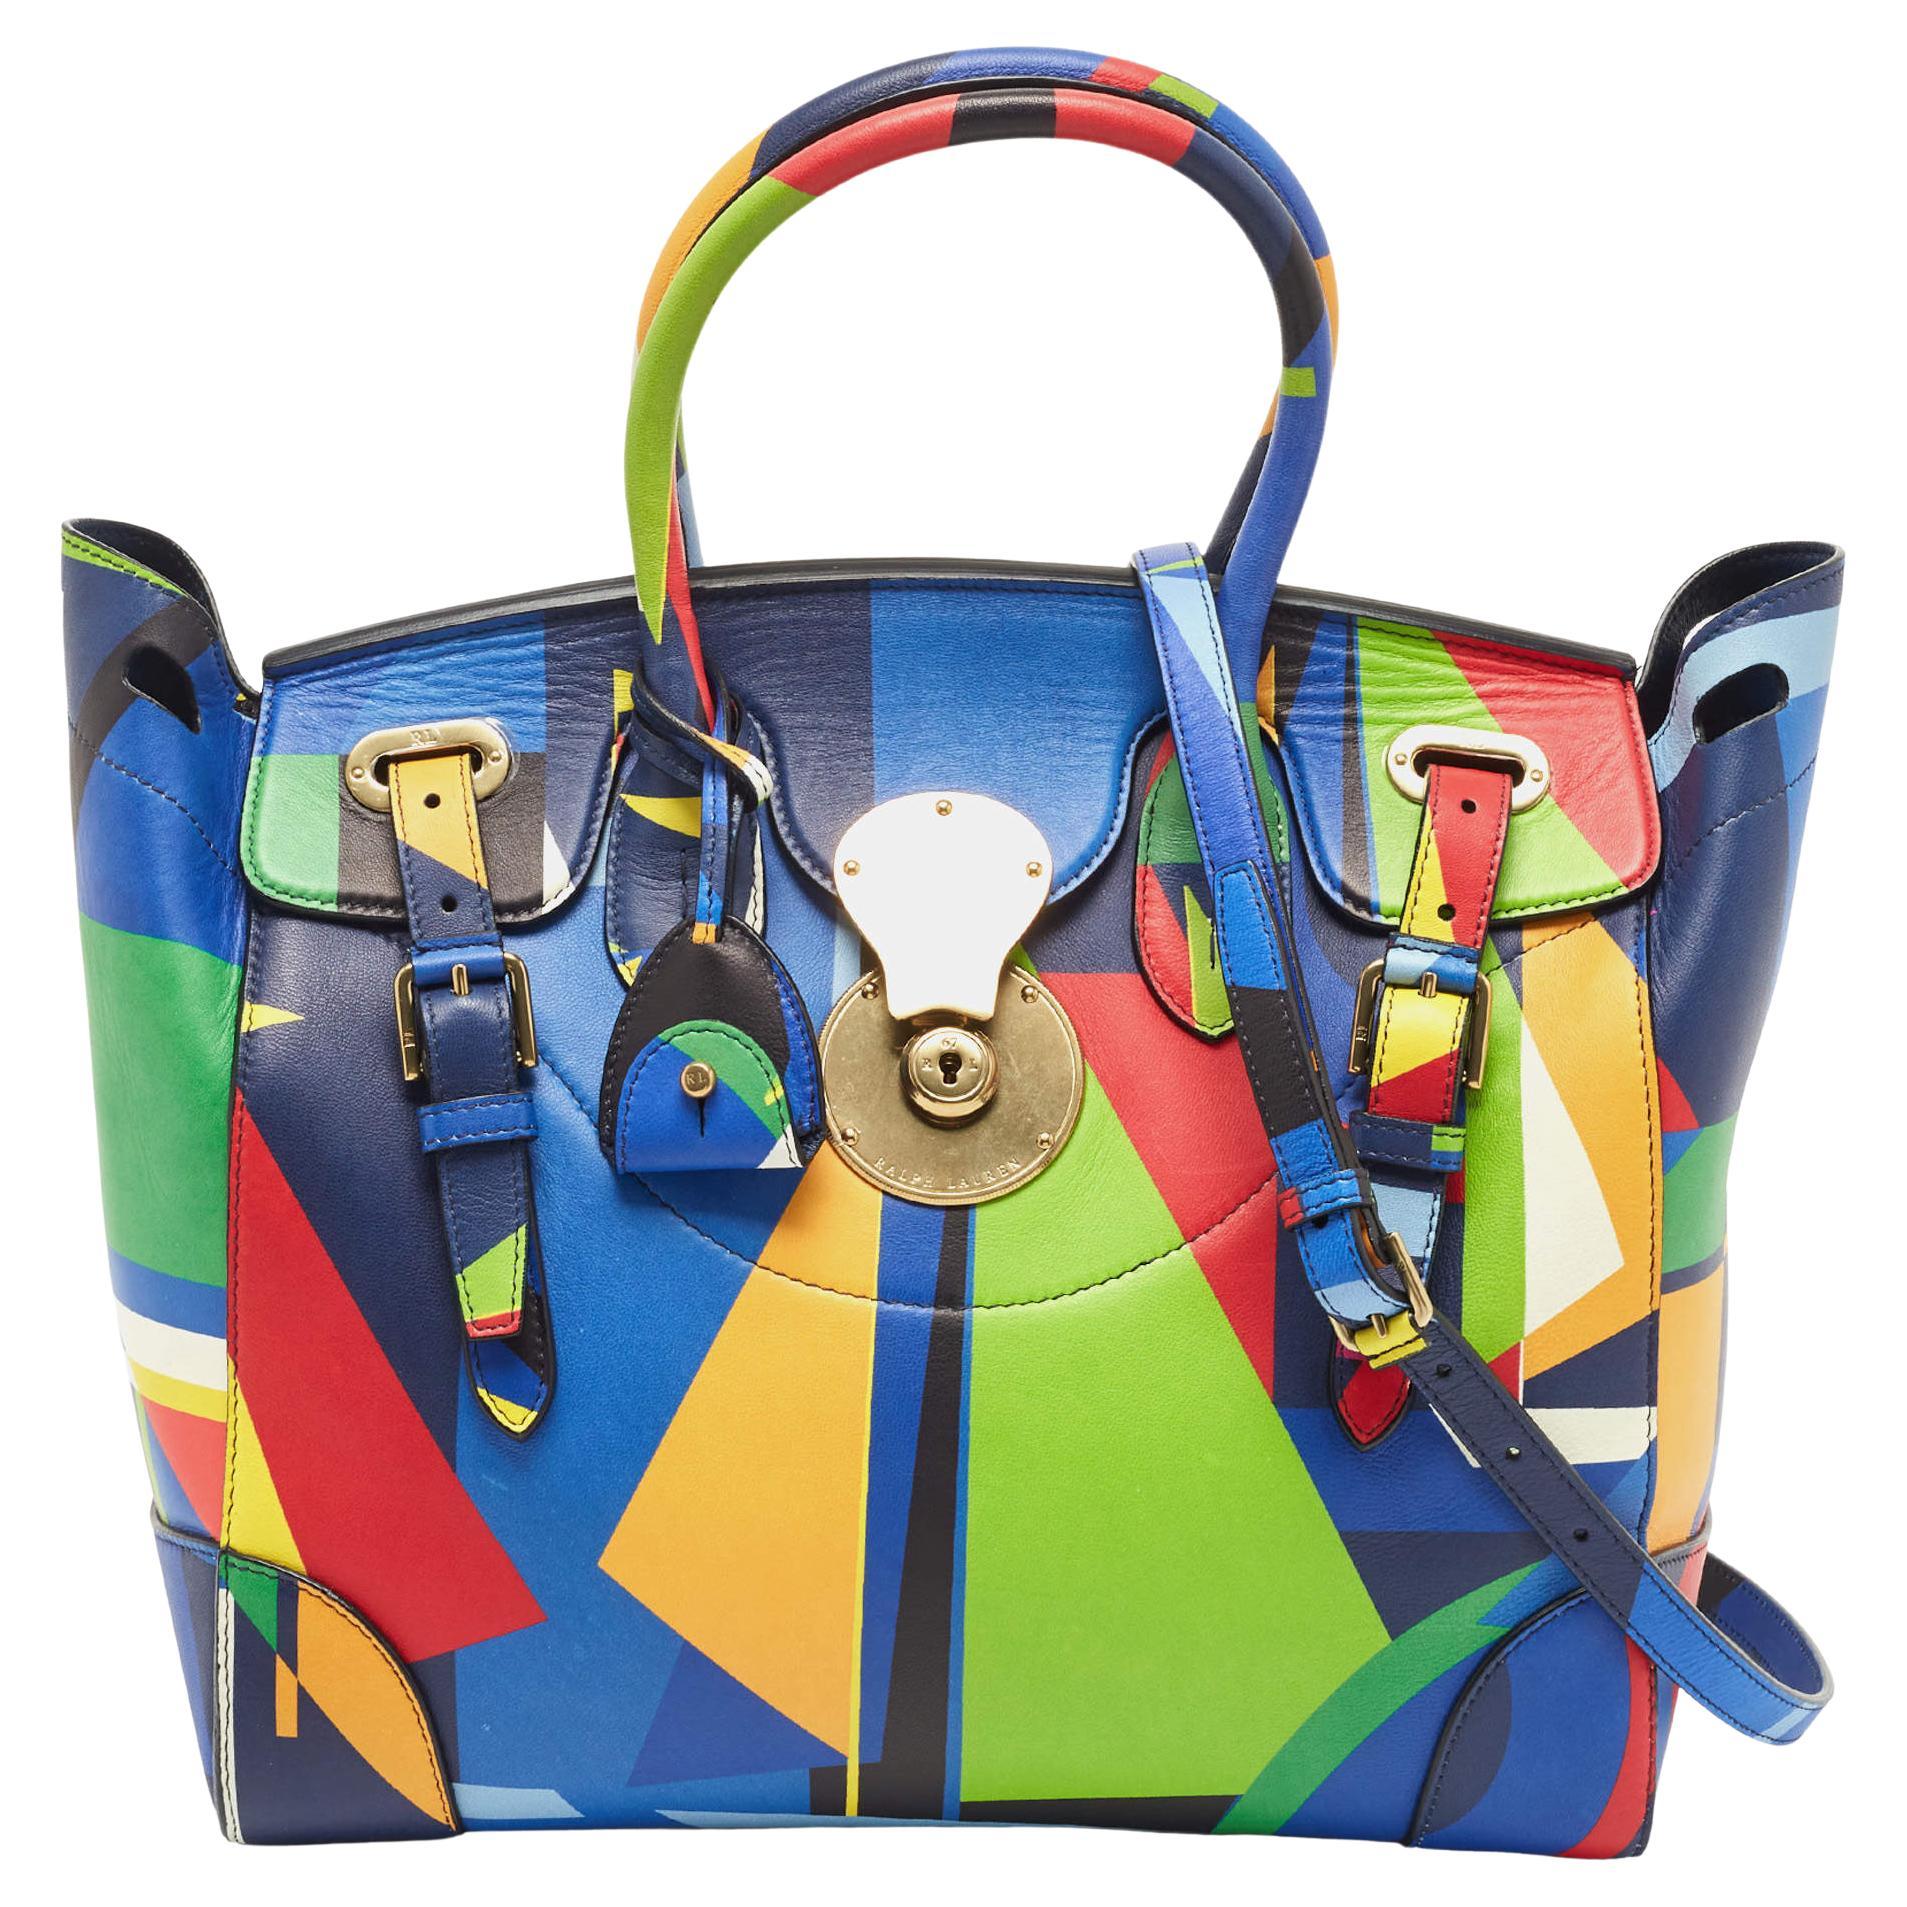 Ralph Lauren Multicolor Soft Leather Ricky Tote